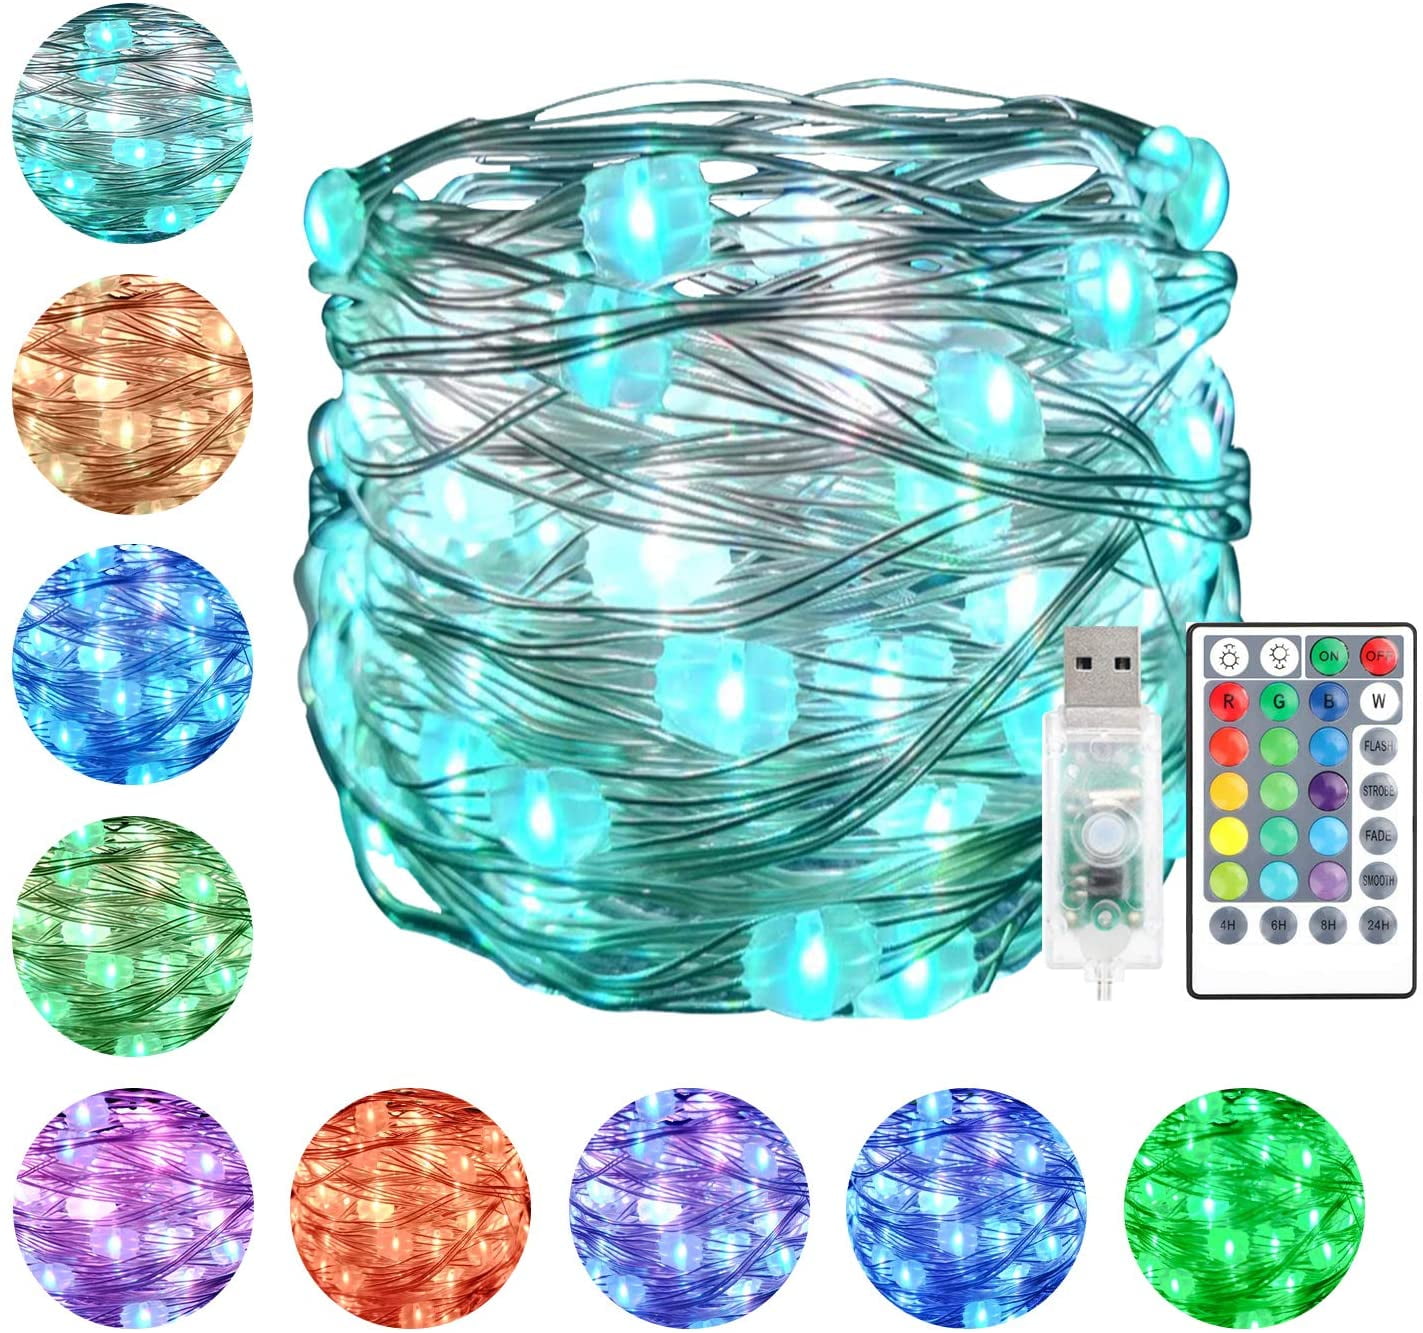 HMCC Fairy Rope String Lights 10m LED USB Powered 16 Multi Colors Changing Strip 